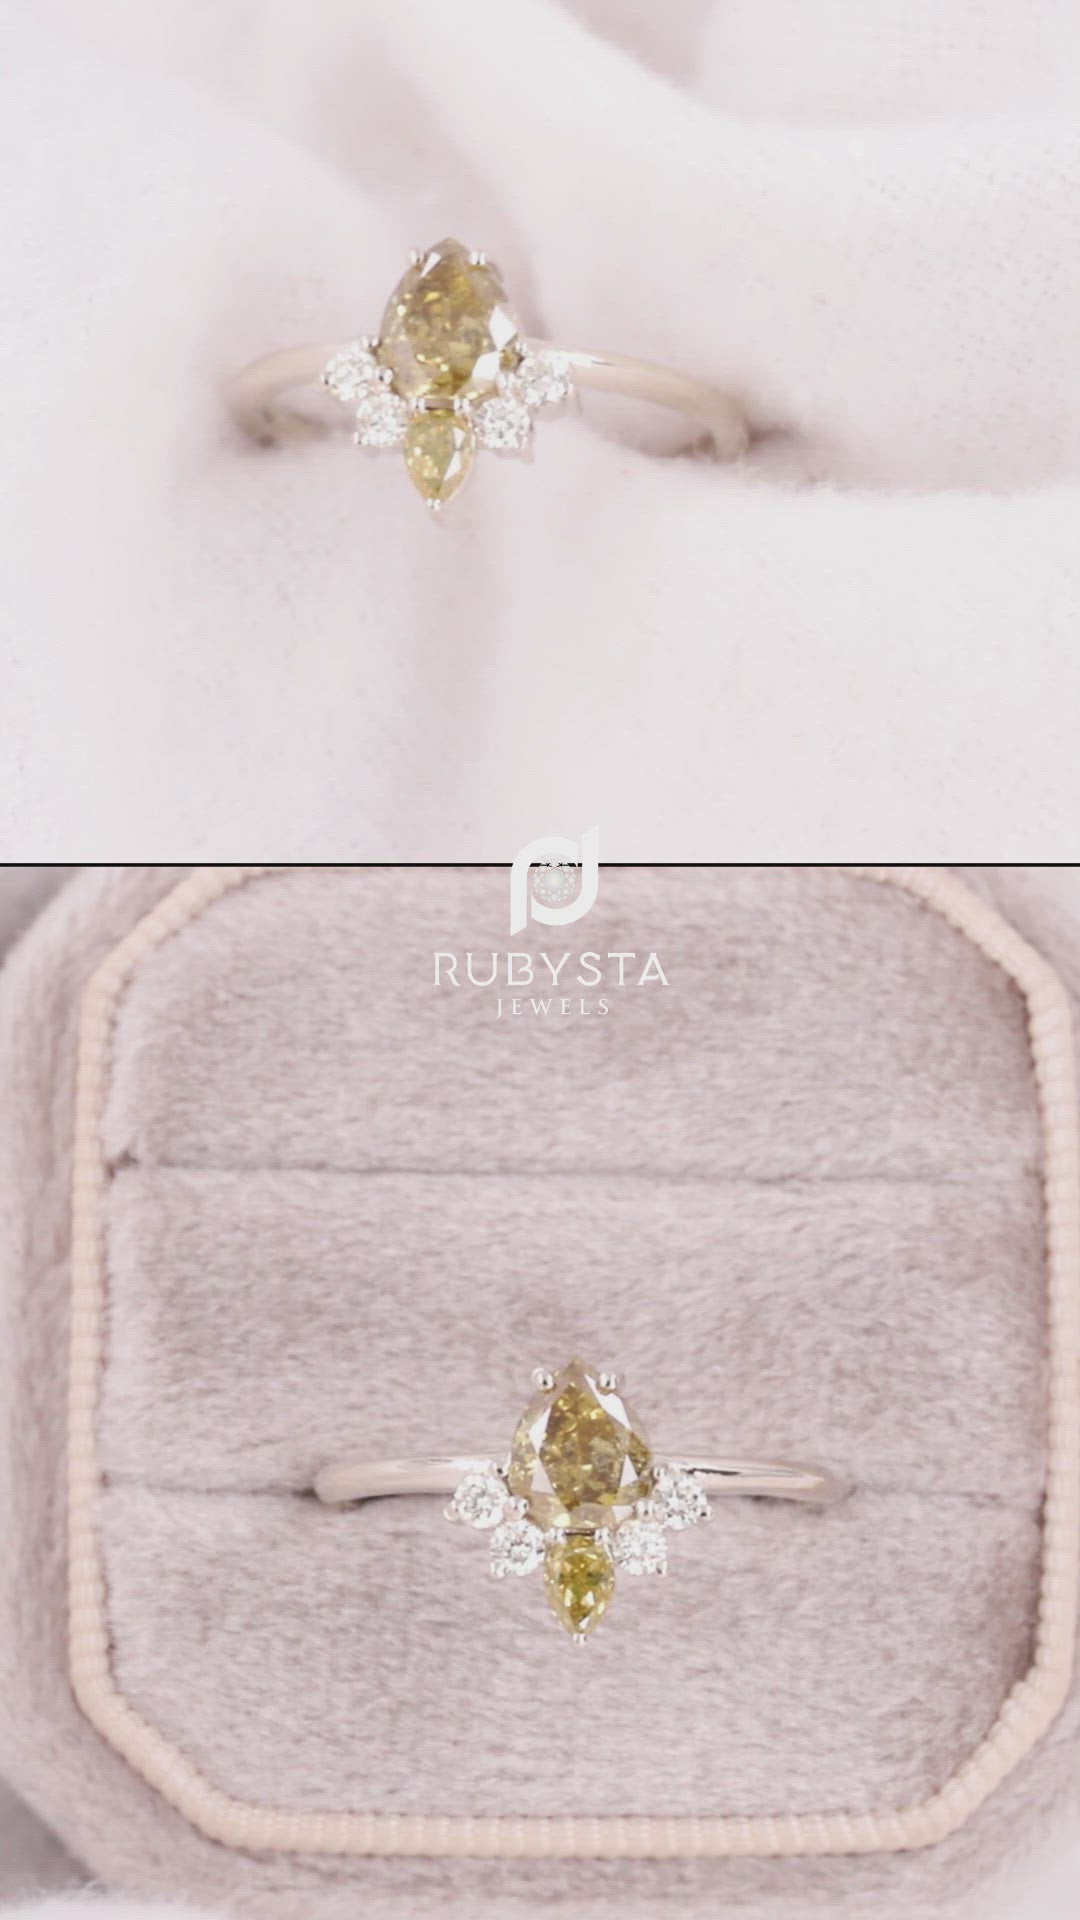 Pear diamond Ring | Fancy Pear Engagement Ring | Fancy Pear Diamond Ring